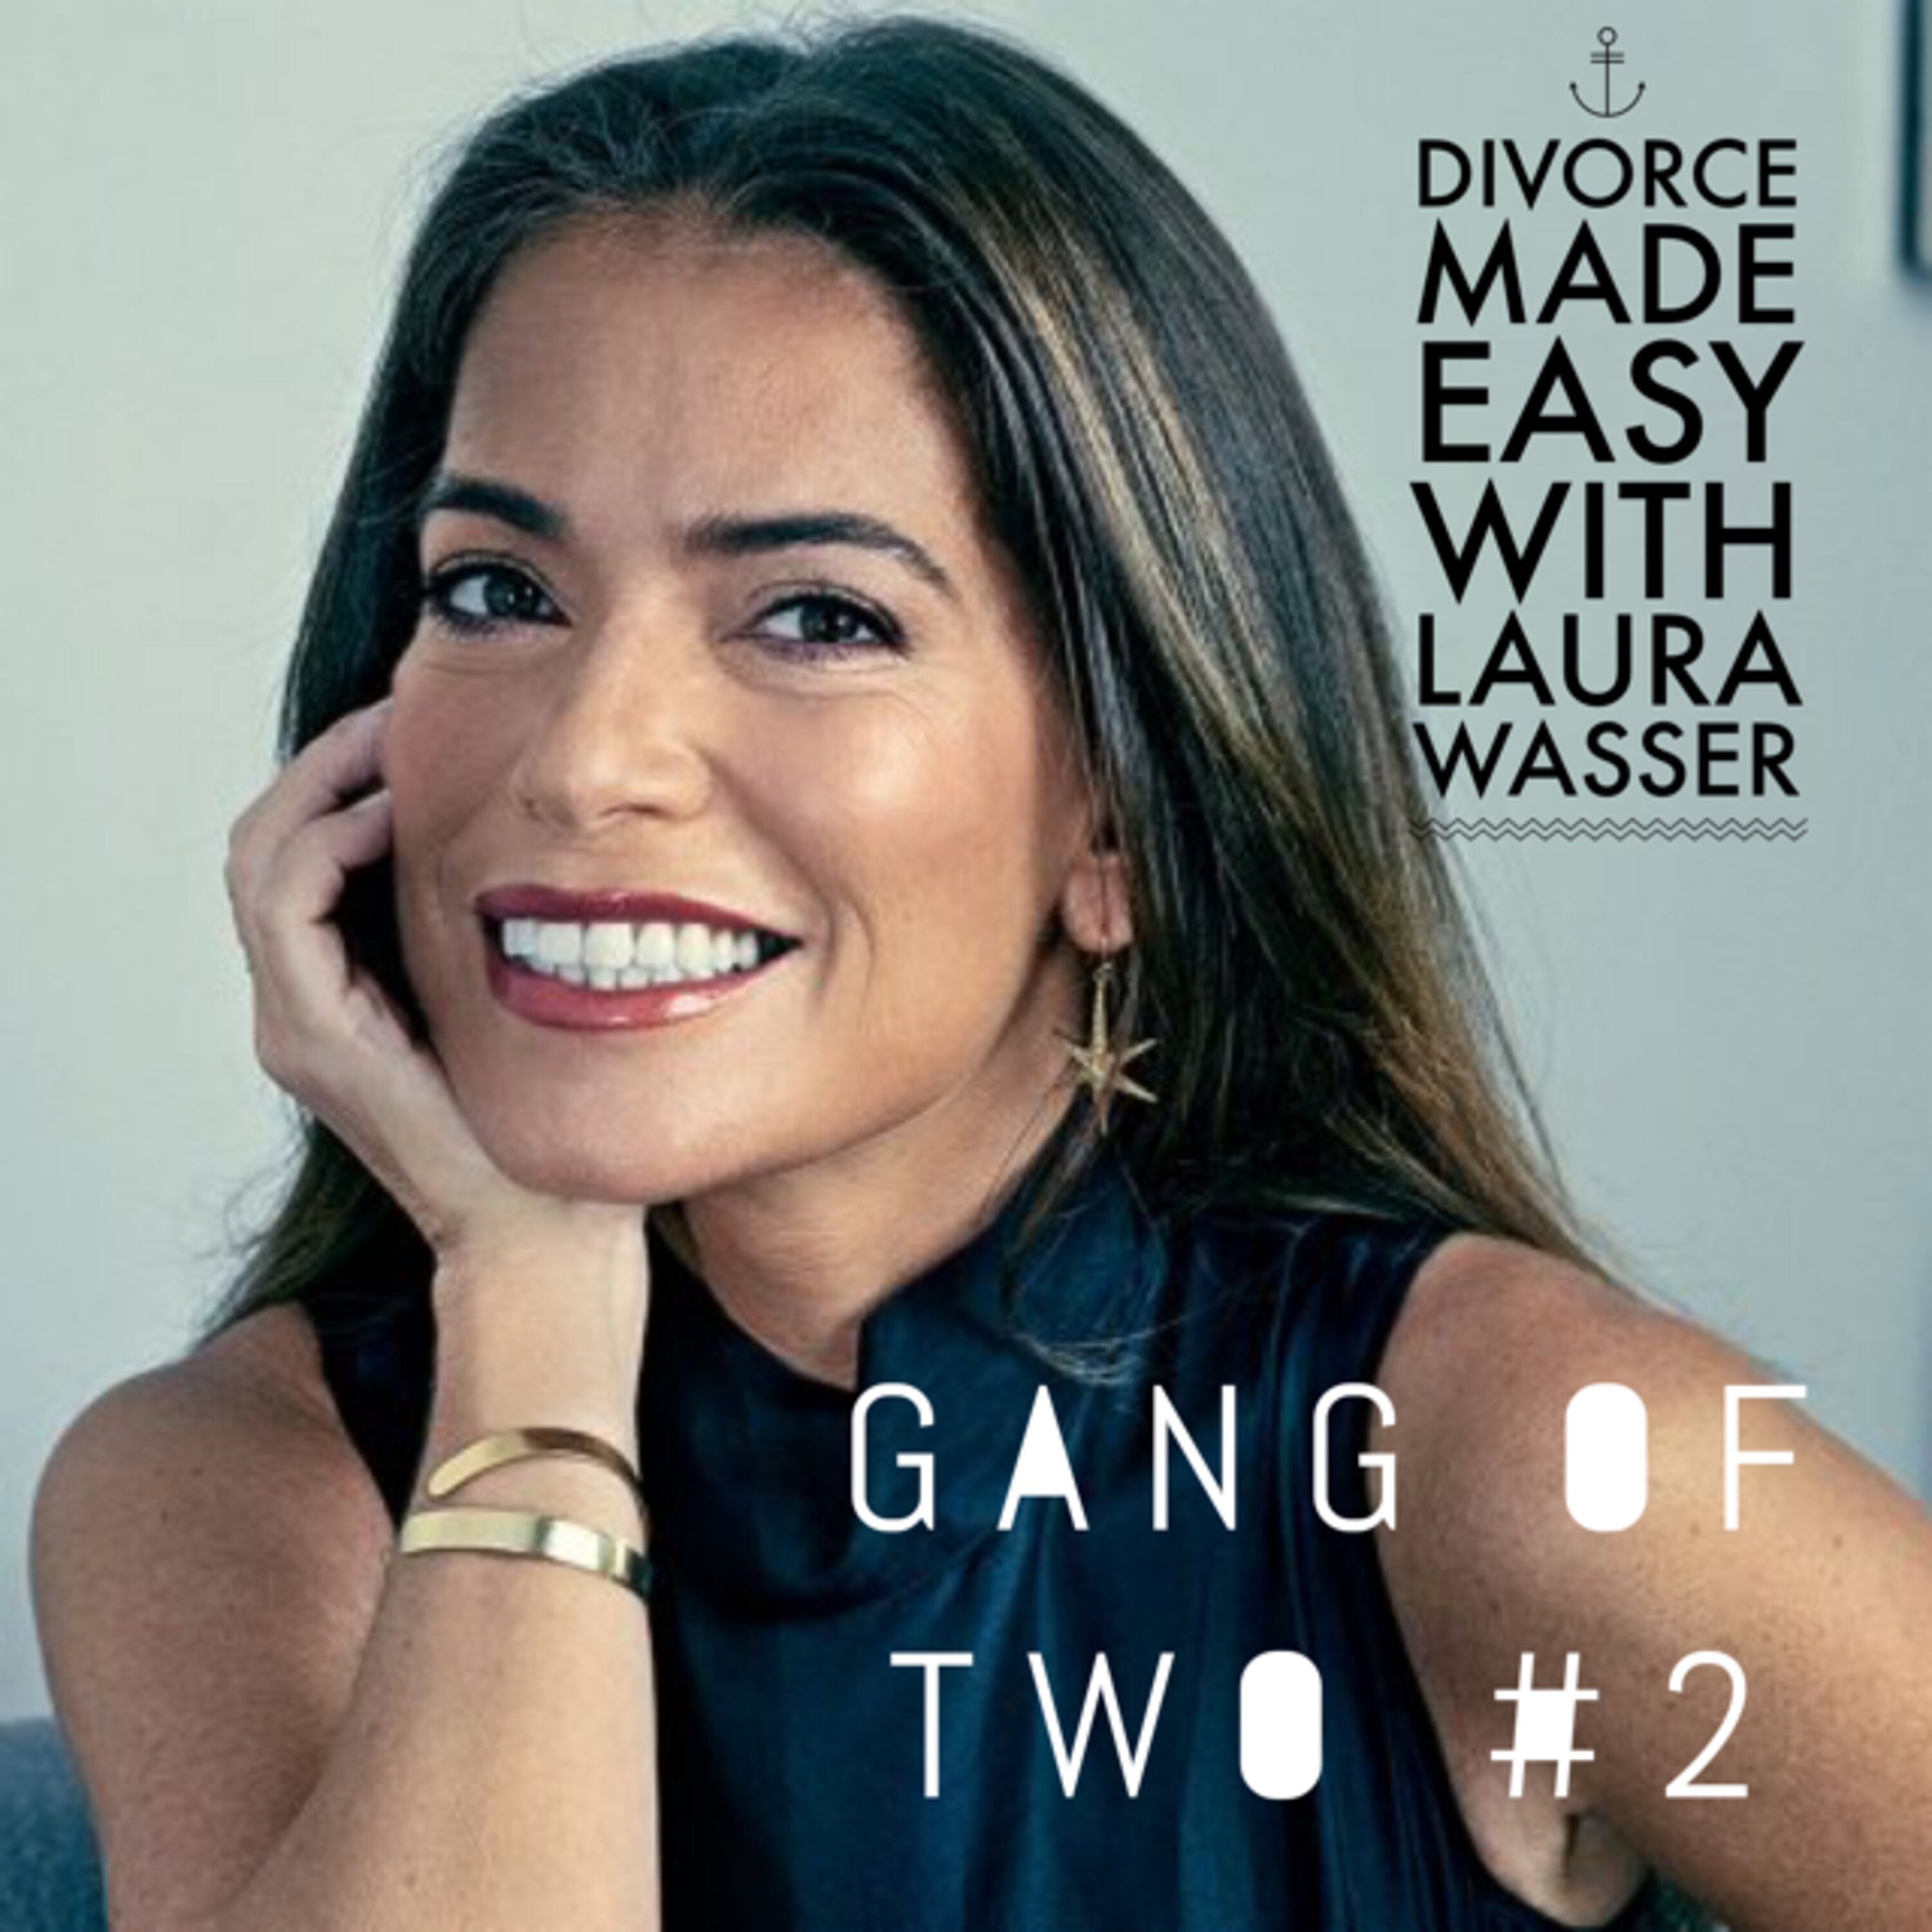 DUMP YOUR PIECE OF S*#T SPOUSE with LAURA WASSER Image